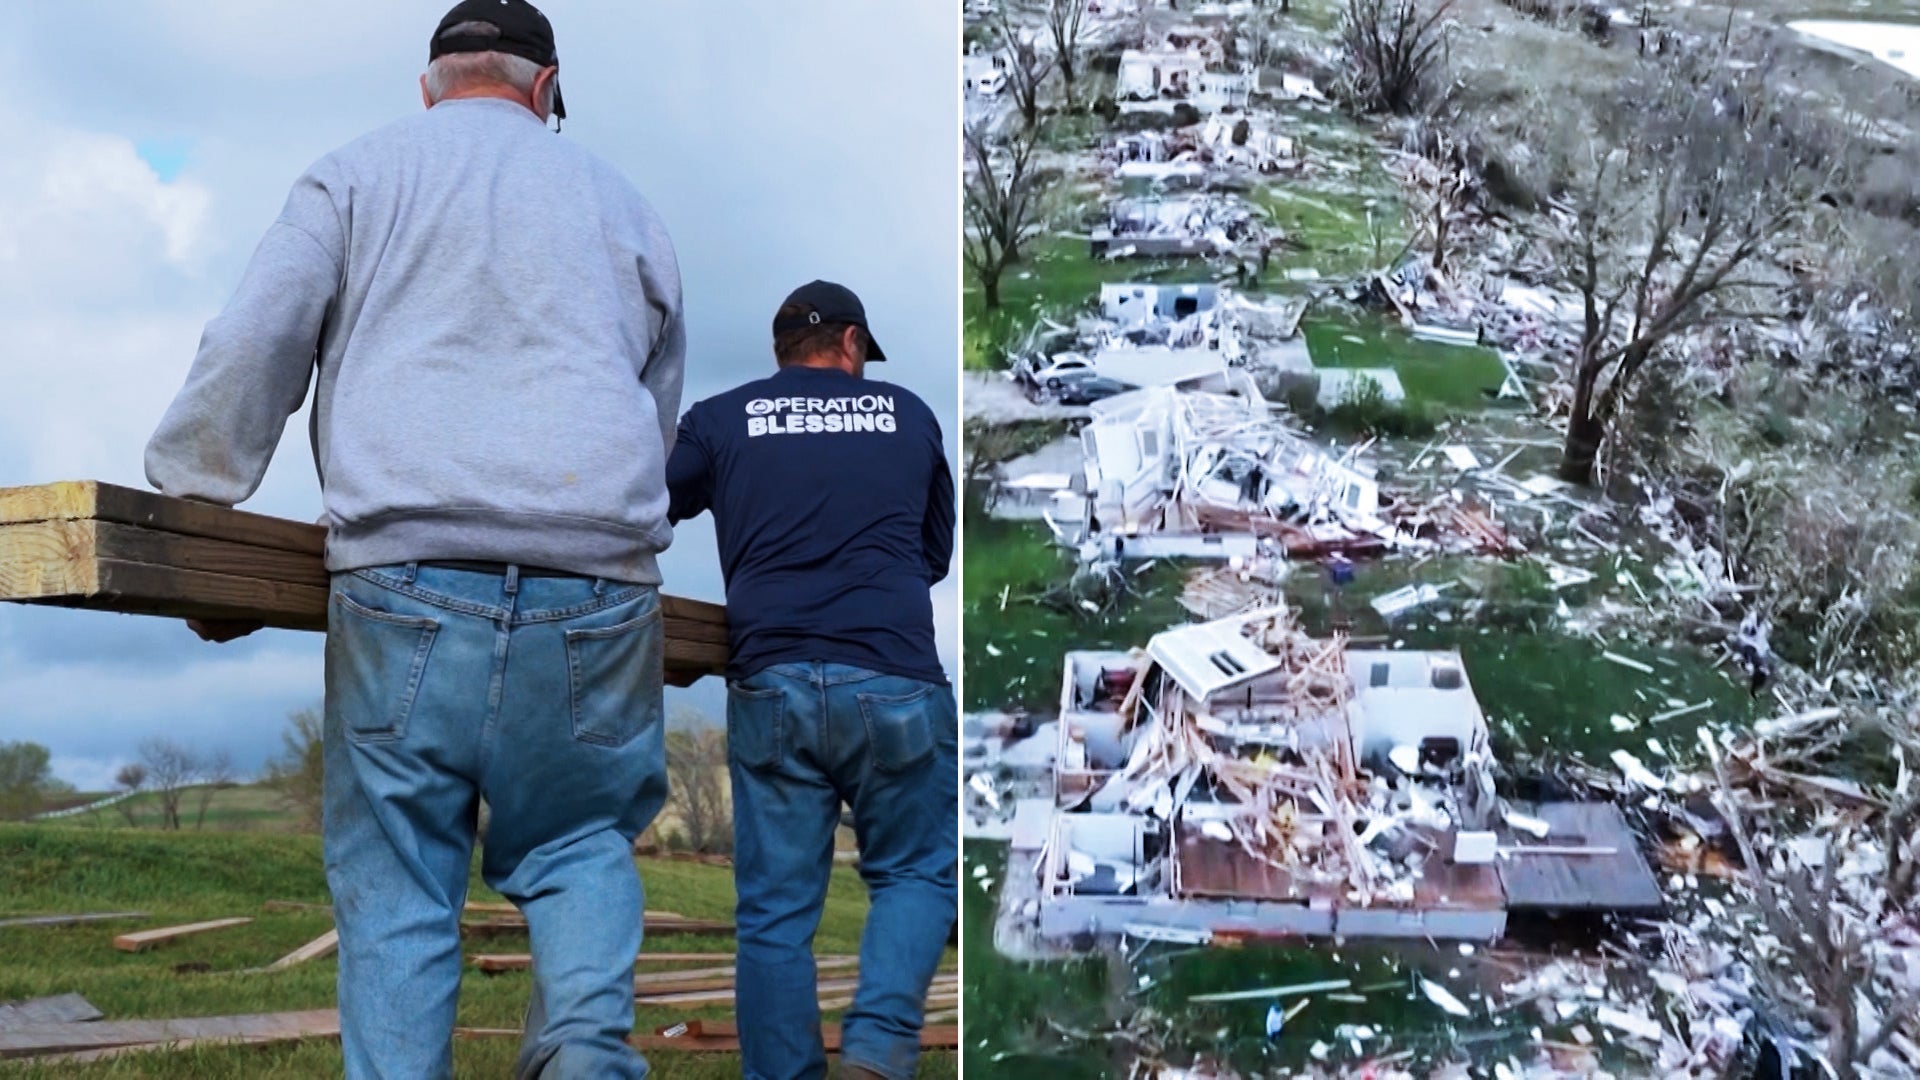 5 Dead After 130 Tornadoes Rip Through America's Heartland, Operation Blessing Helps Rebuild